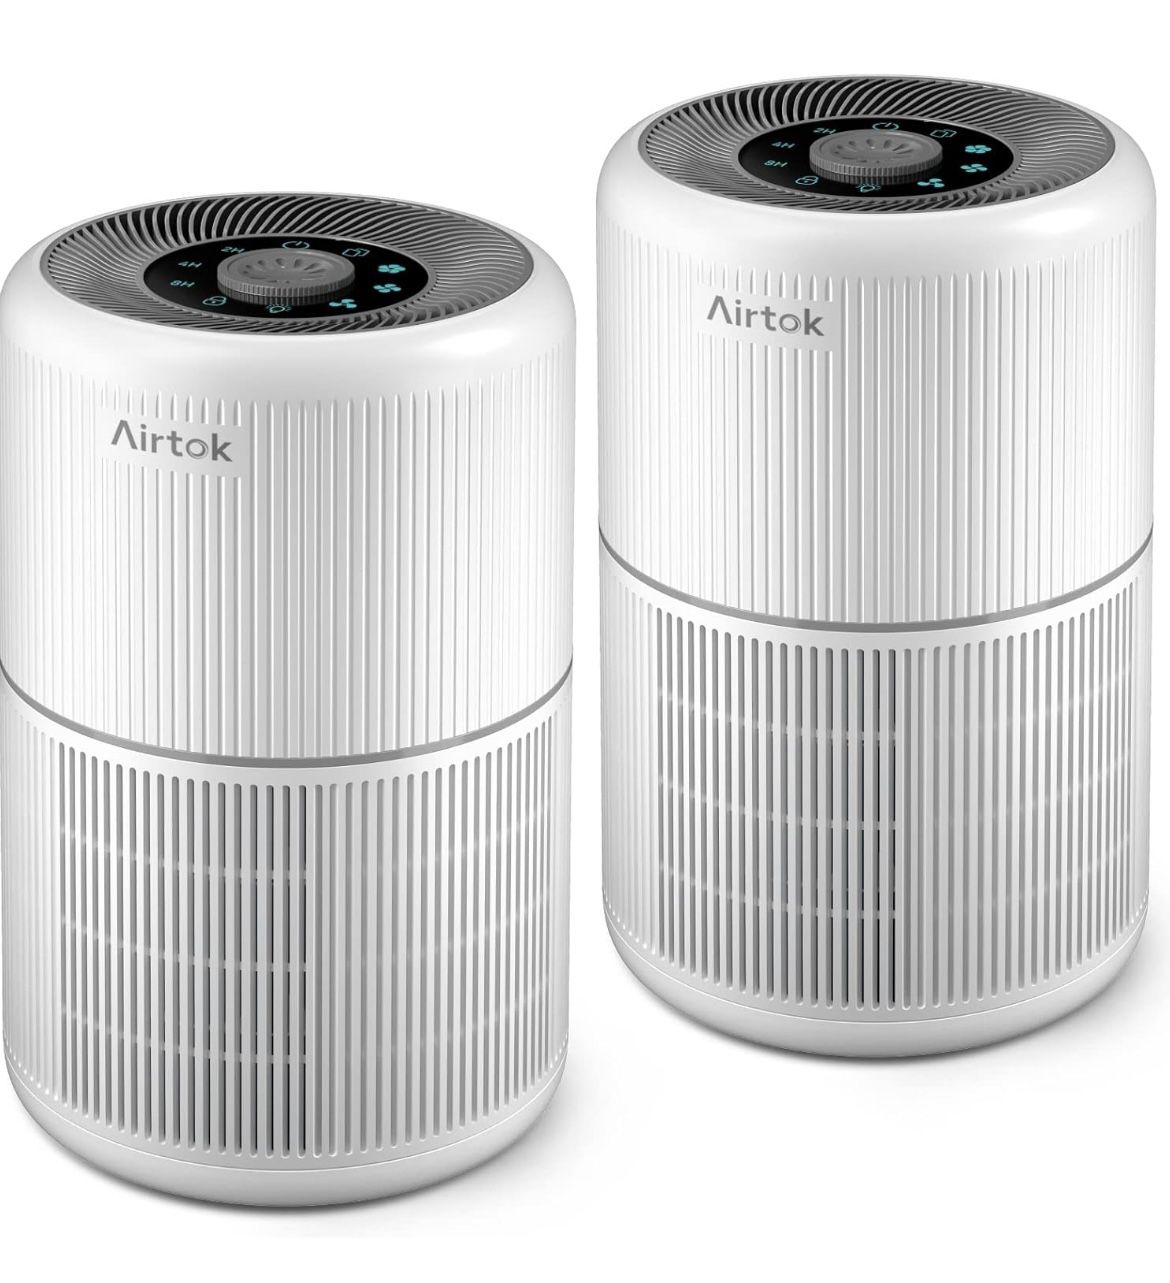 #208-2 Pack Air Purifier for Home Bedroom with H13 True HEPA Filter for Smoke, Smokers, Dust, Odors, Pollen, Pet Dander | Quiet 99.9% Removal to 0.1 M